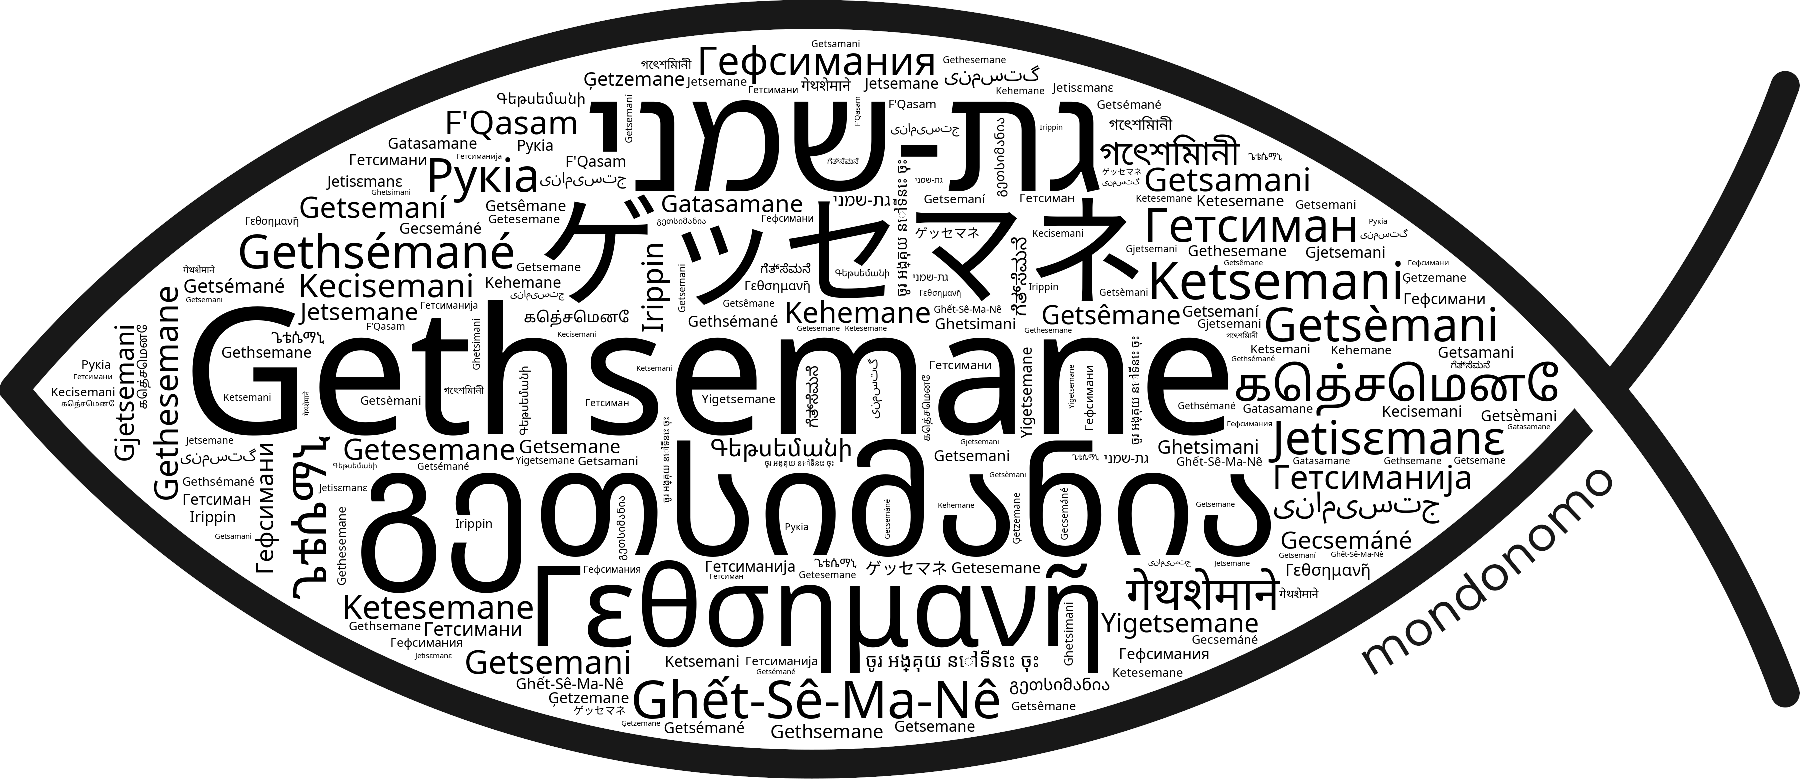 Name Gethsemane in the world's Bibles